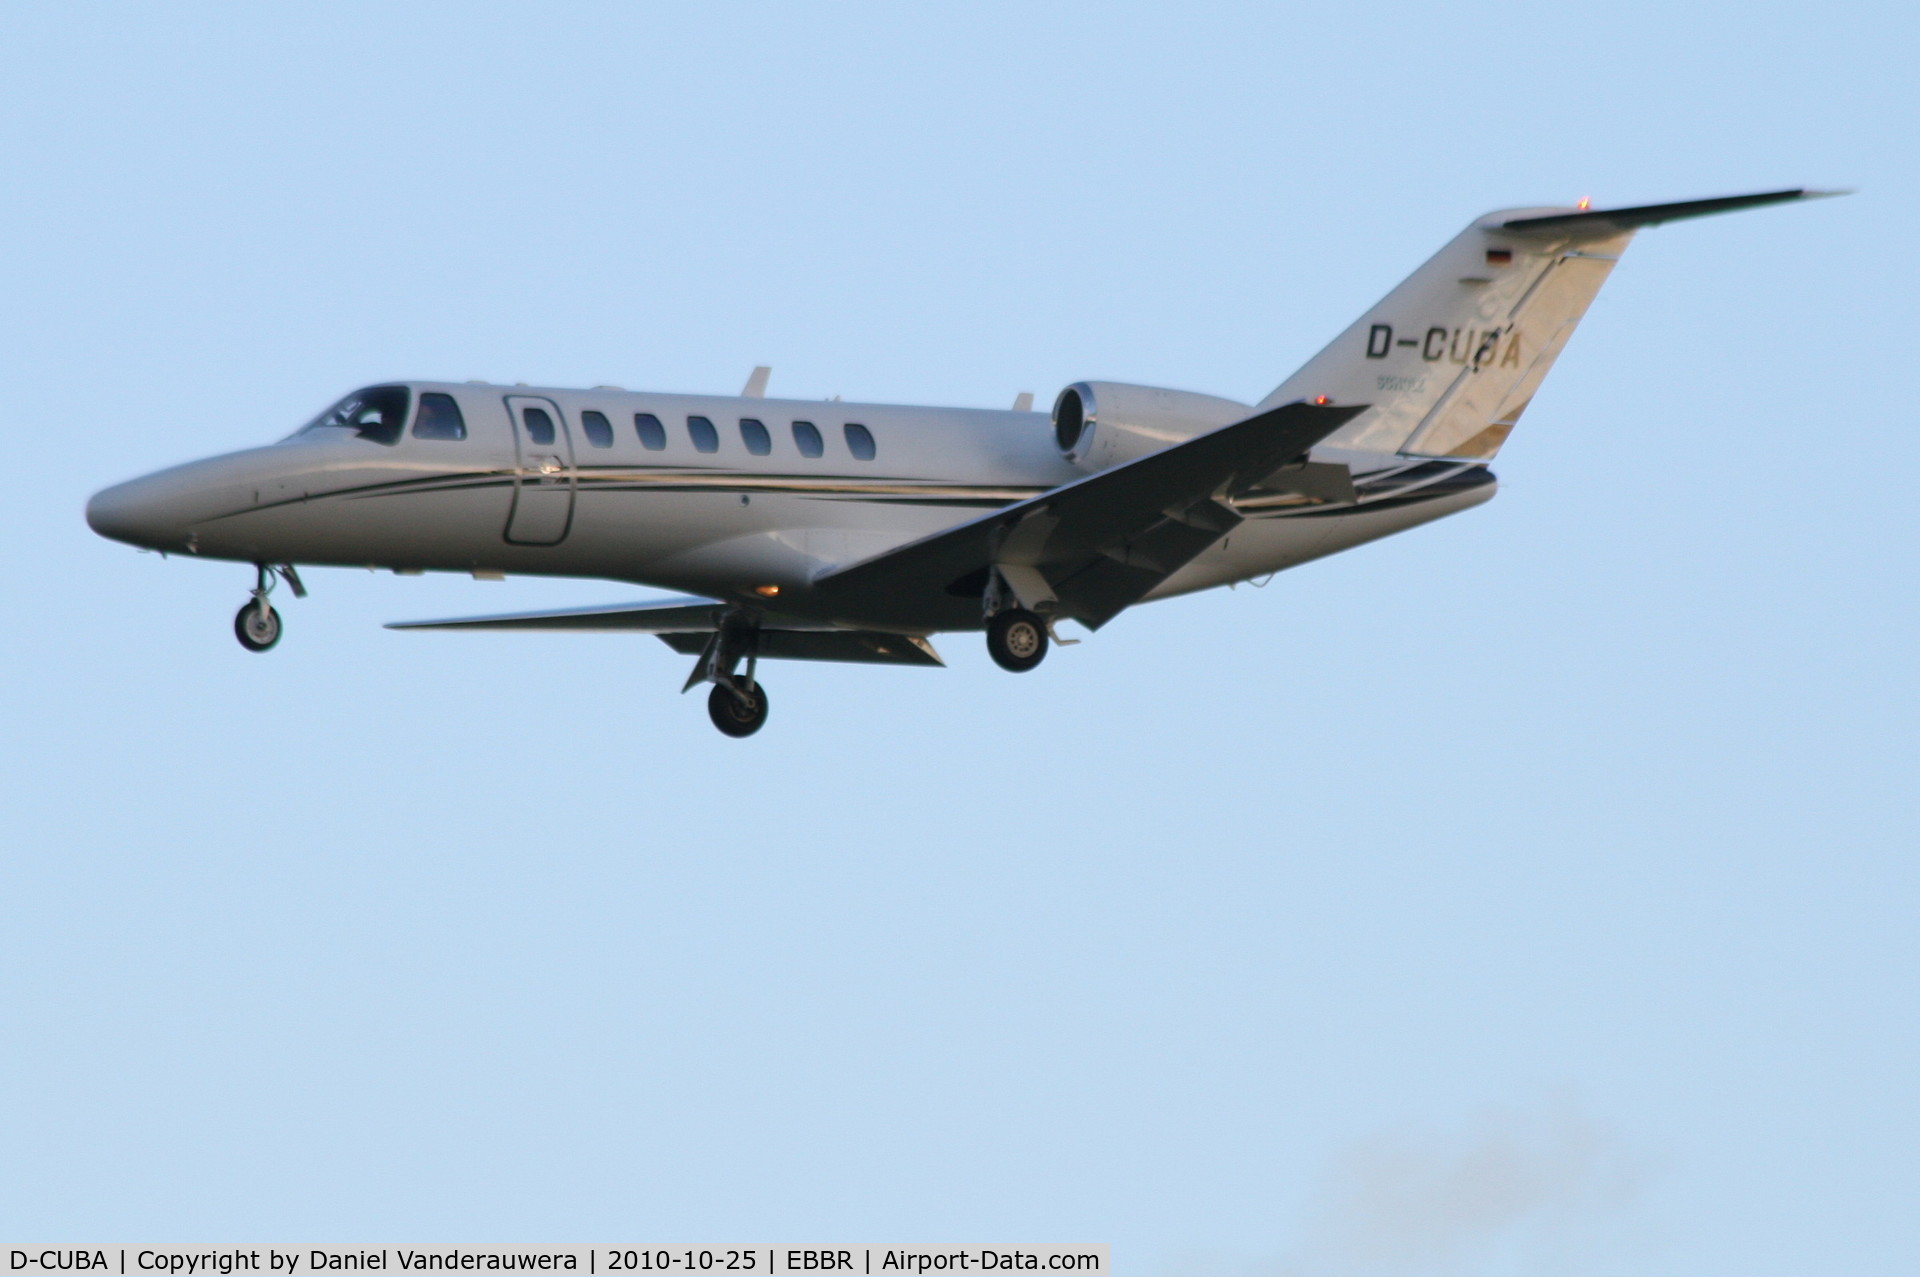 D-CUBA, 2007 Cessna 525B CitationJet CJ3 C/N 525B-0169, Arriving to RWY 25L while thick clouds are covering the sun